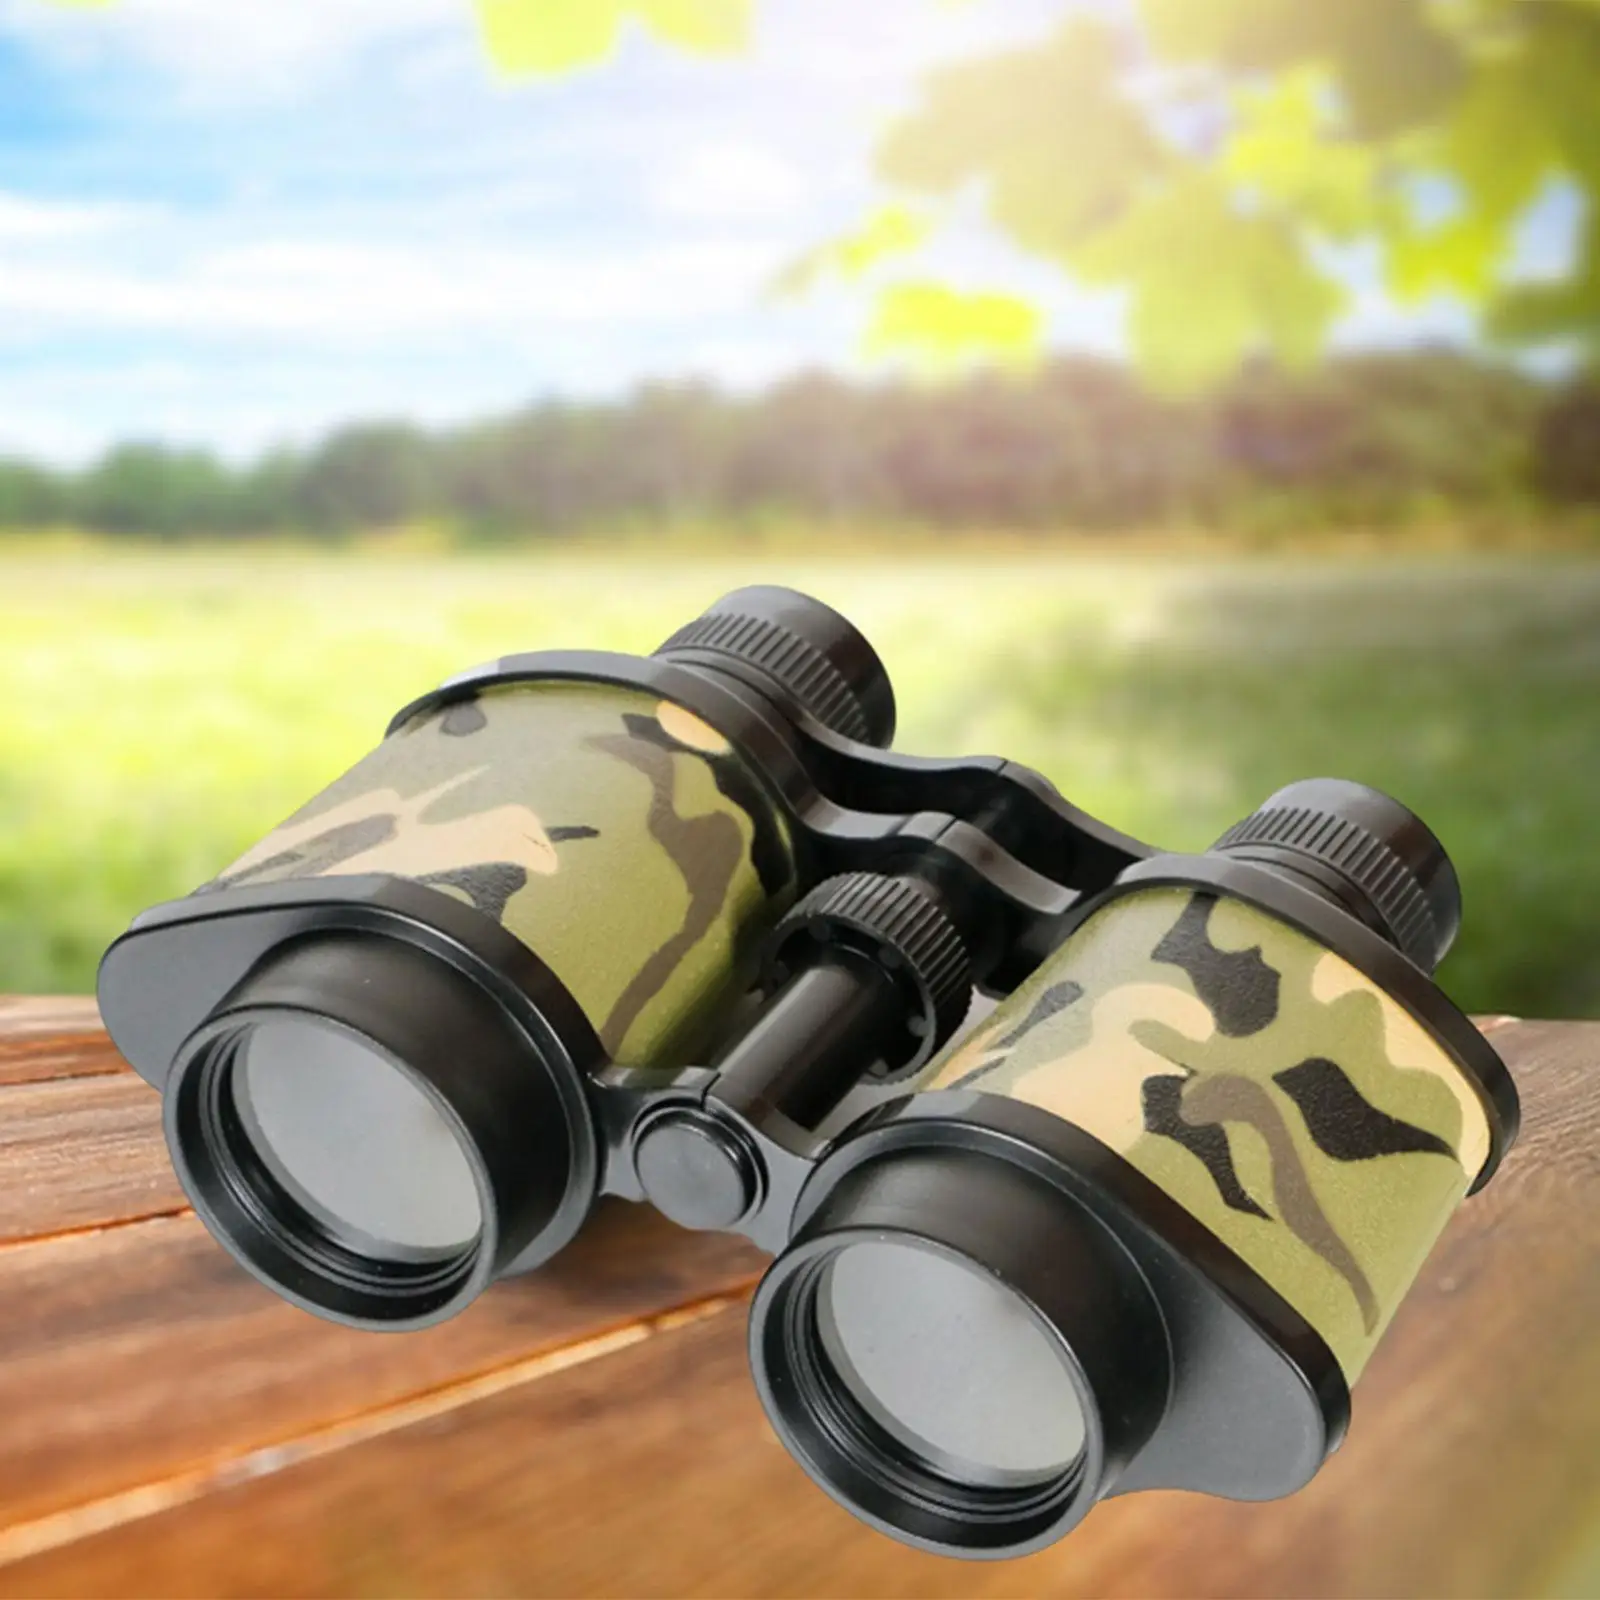 Kids Binoculars Toy 8x30 Portable Educational Children Magnification Toy for Exploration Hunting Party Favors Birthday Sports